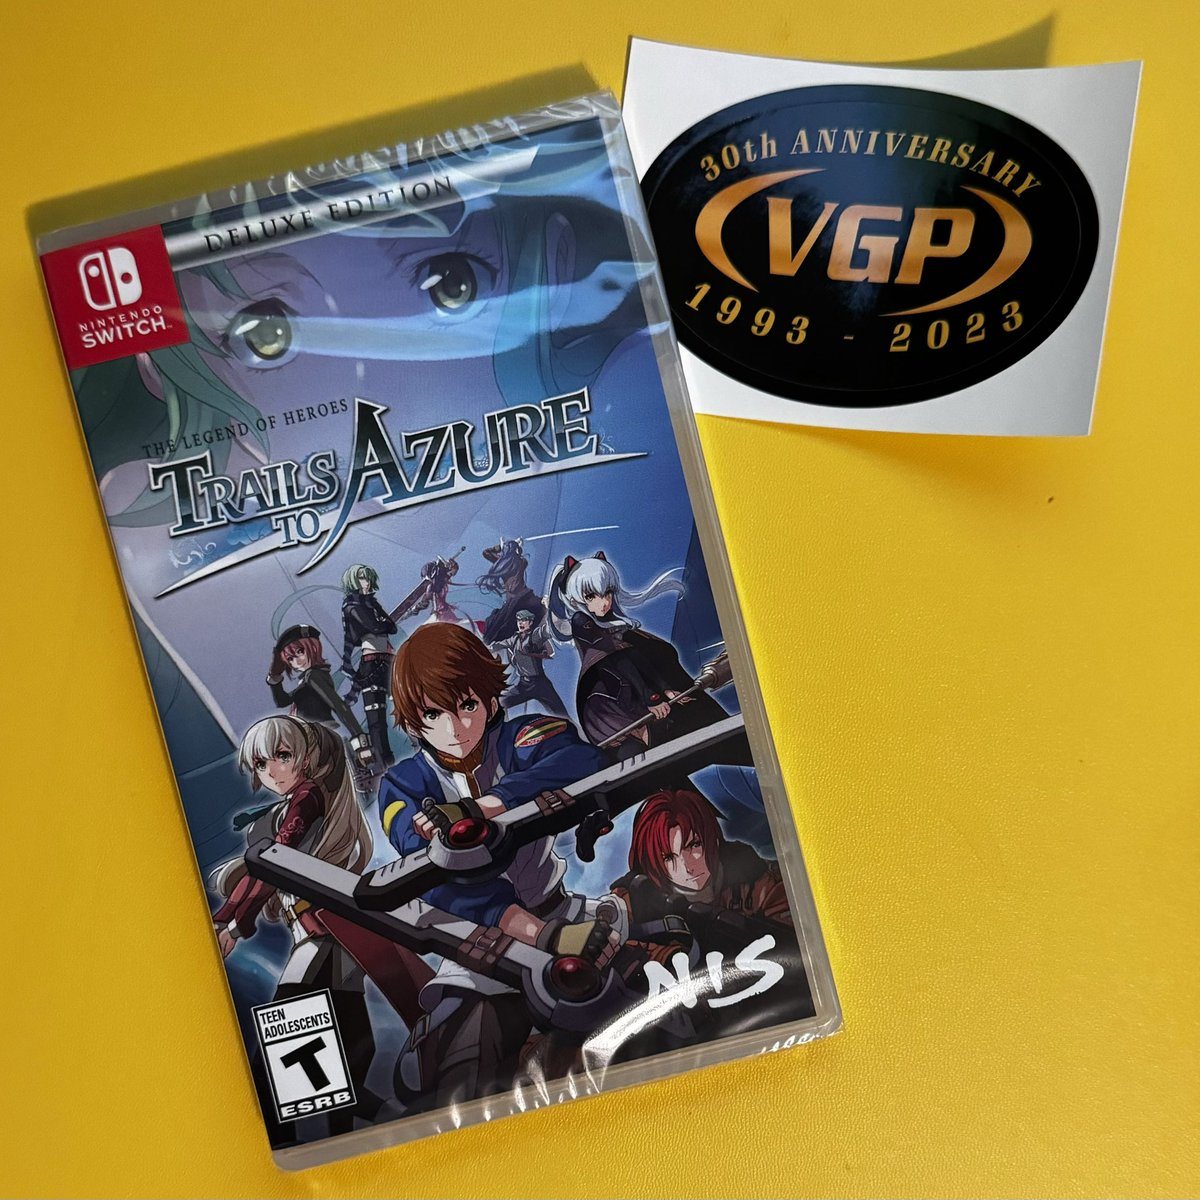 My first Trails game came in today!
#switchcorps